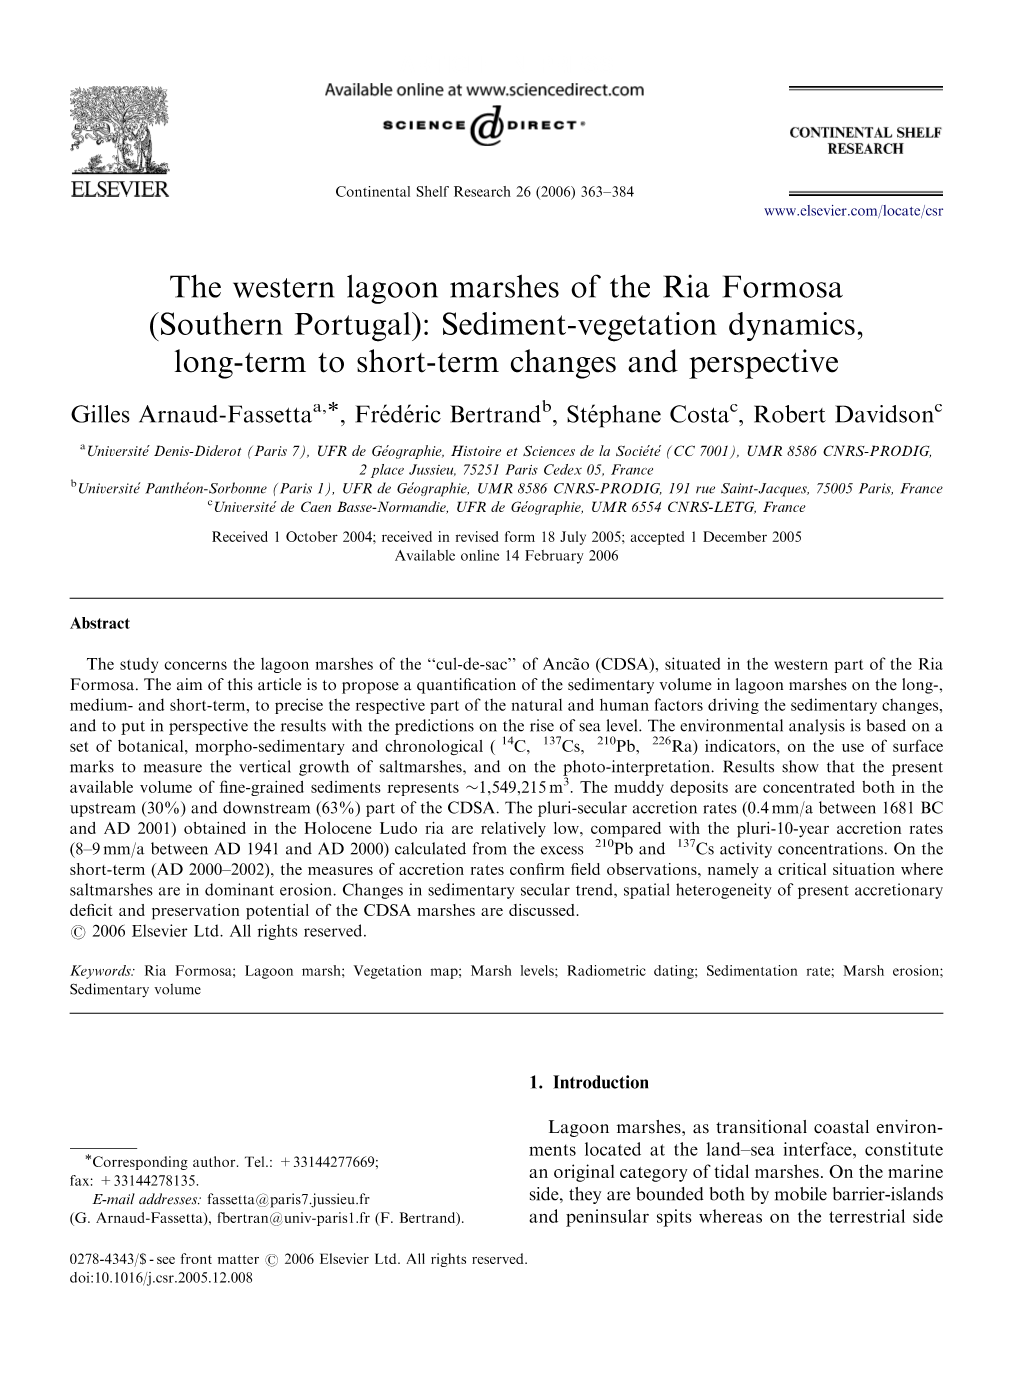 The Western Lagoon Marshes of the Ria Formosa (Southern Portugal): Sediment-Vegetation Dynamics, Long-Term to Short-Term Changes and Perspective